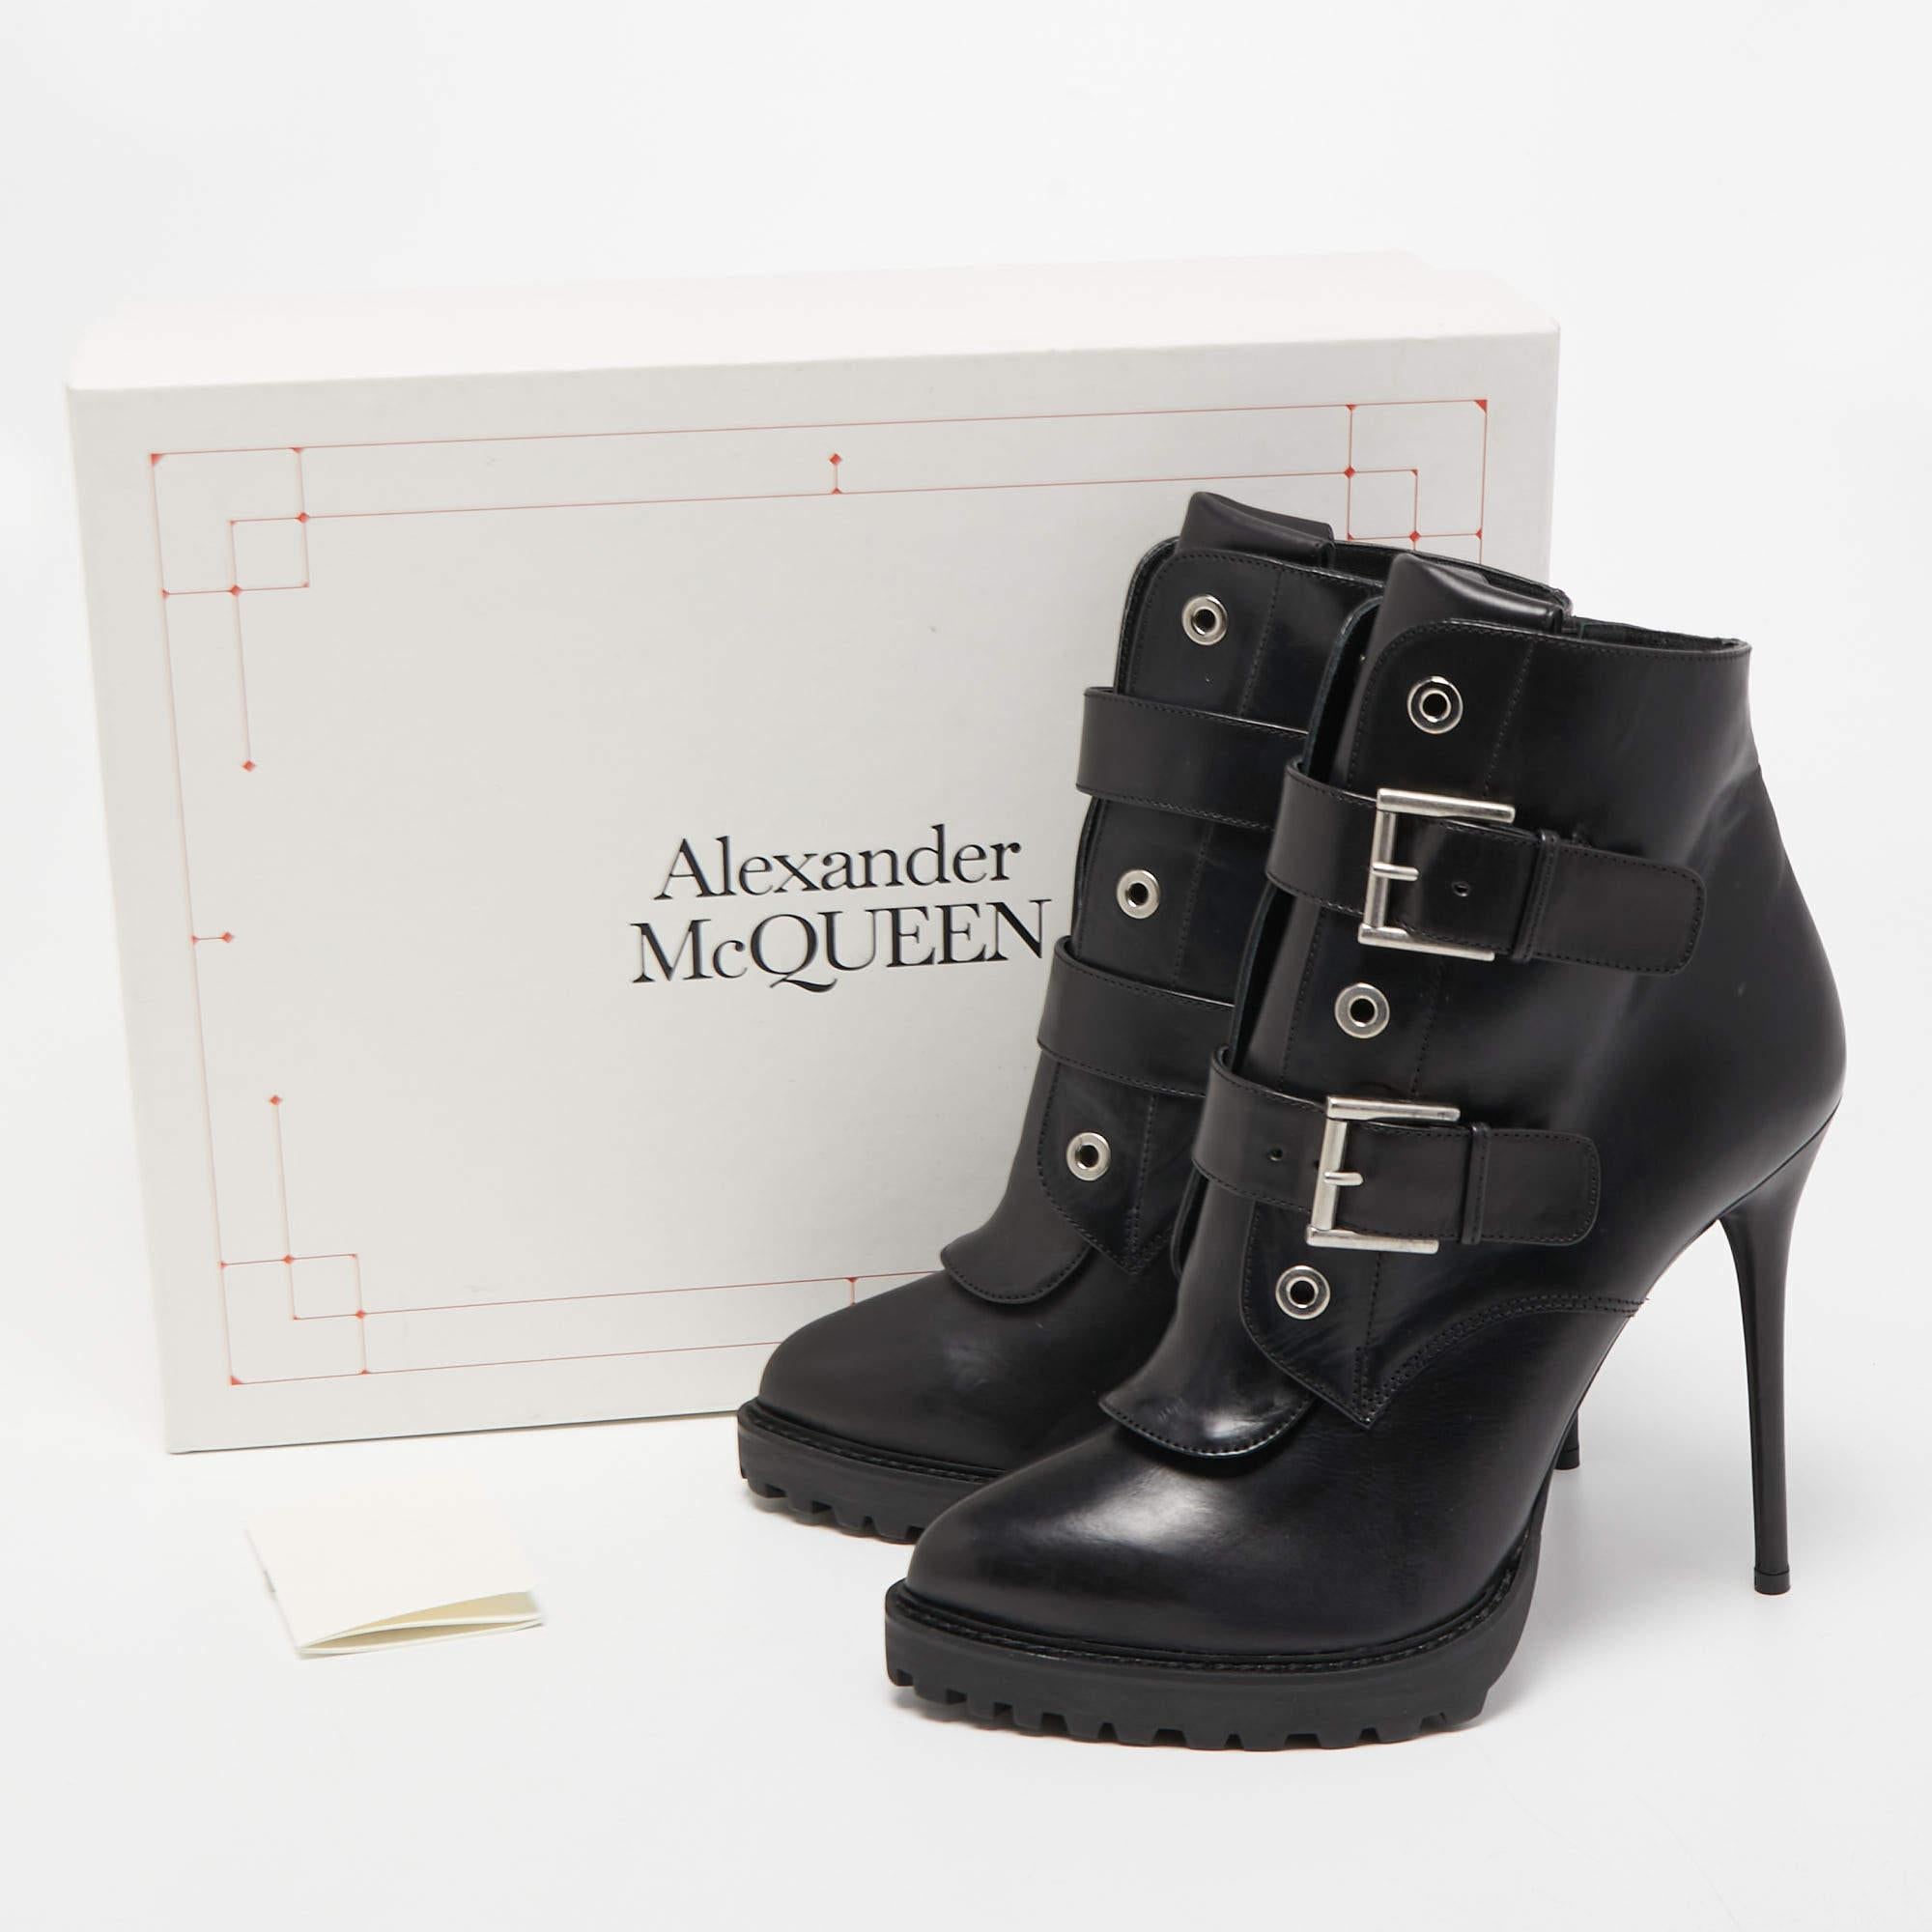 Alexander McQueen Black Leather Buckle Detail Boots Size 40 3